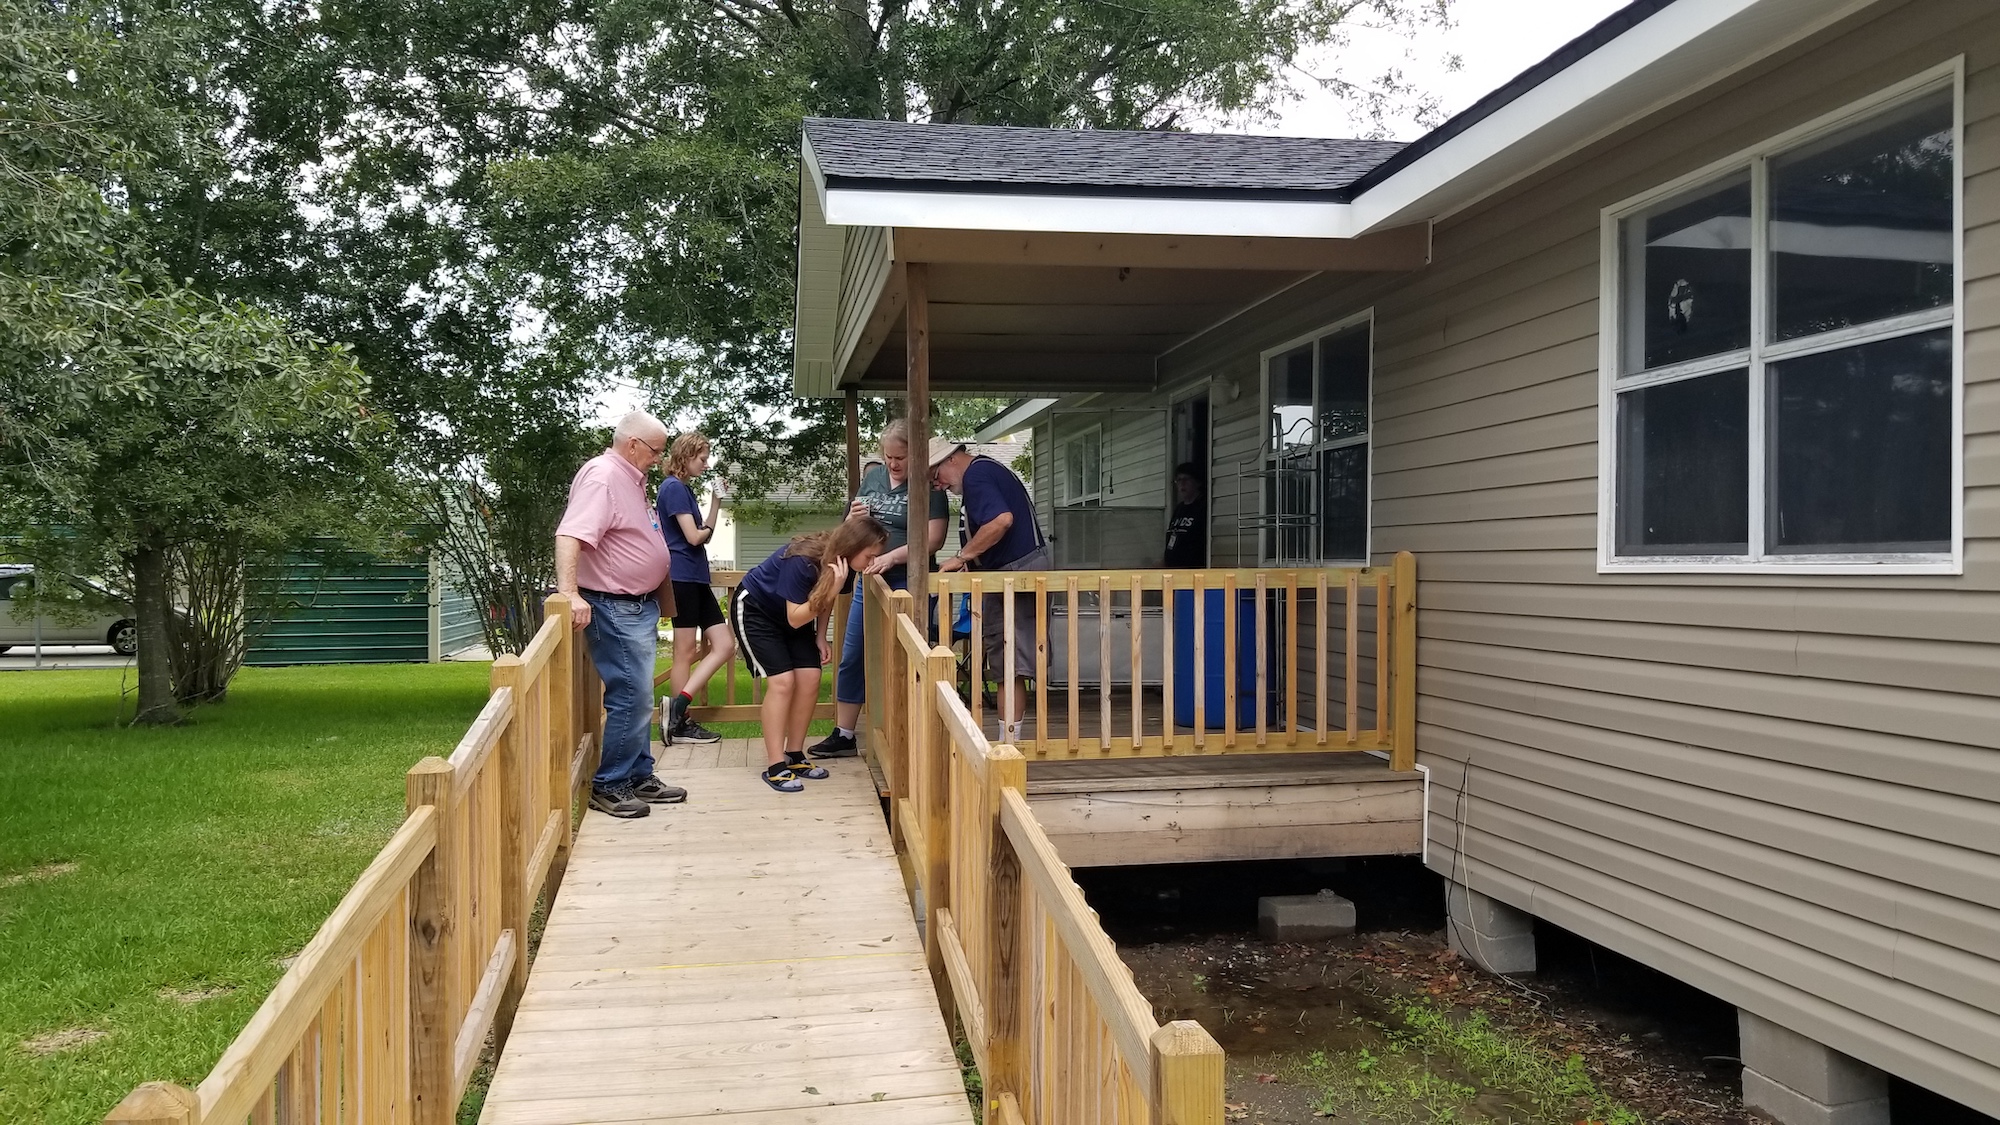 Volunteers inspect a wooden ramp leading to a home in Welsh that is being finished up with repairs